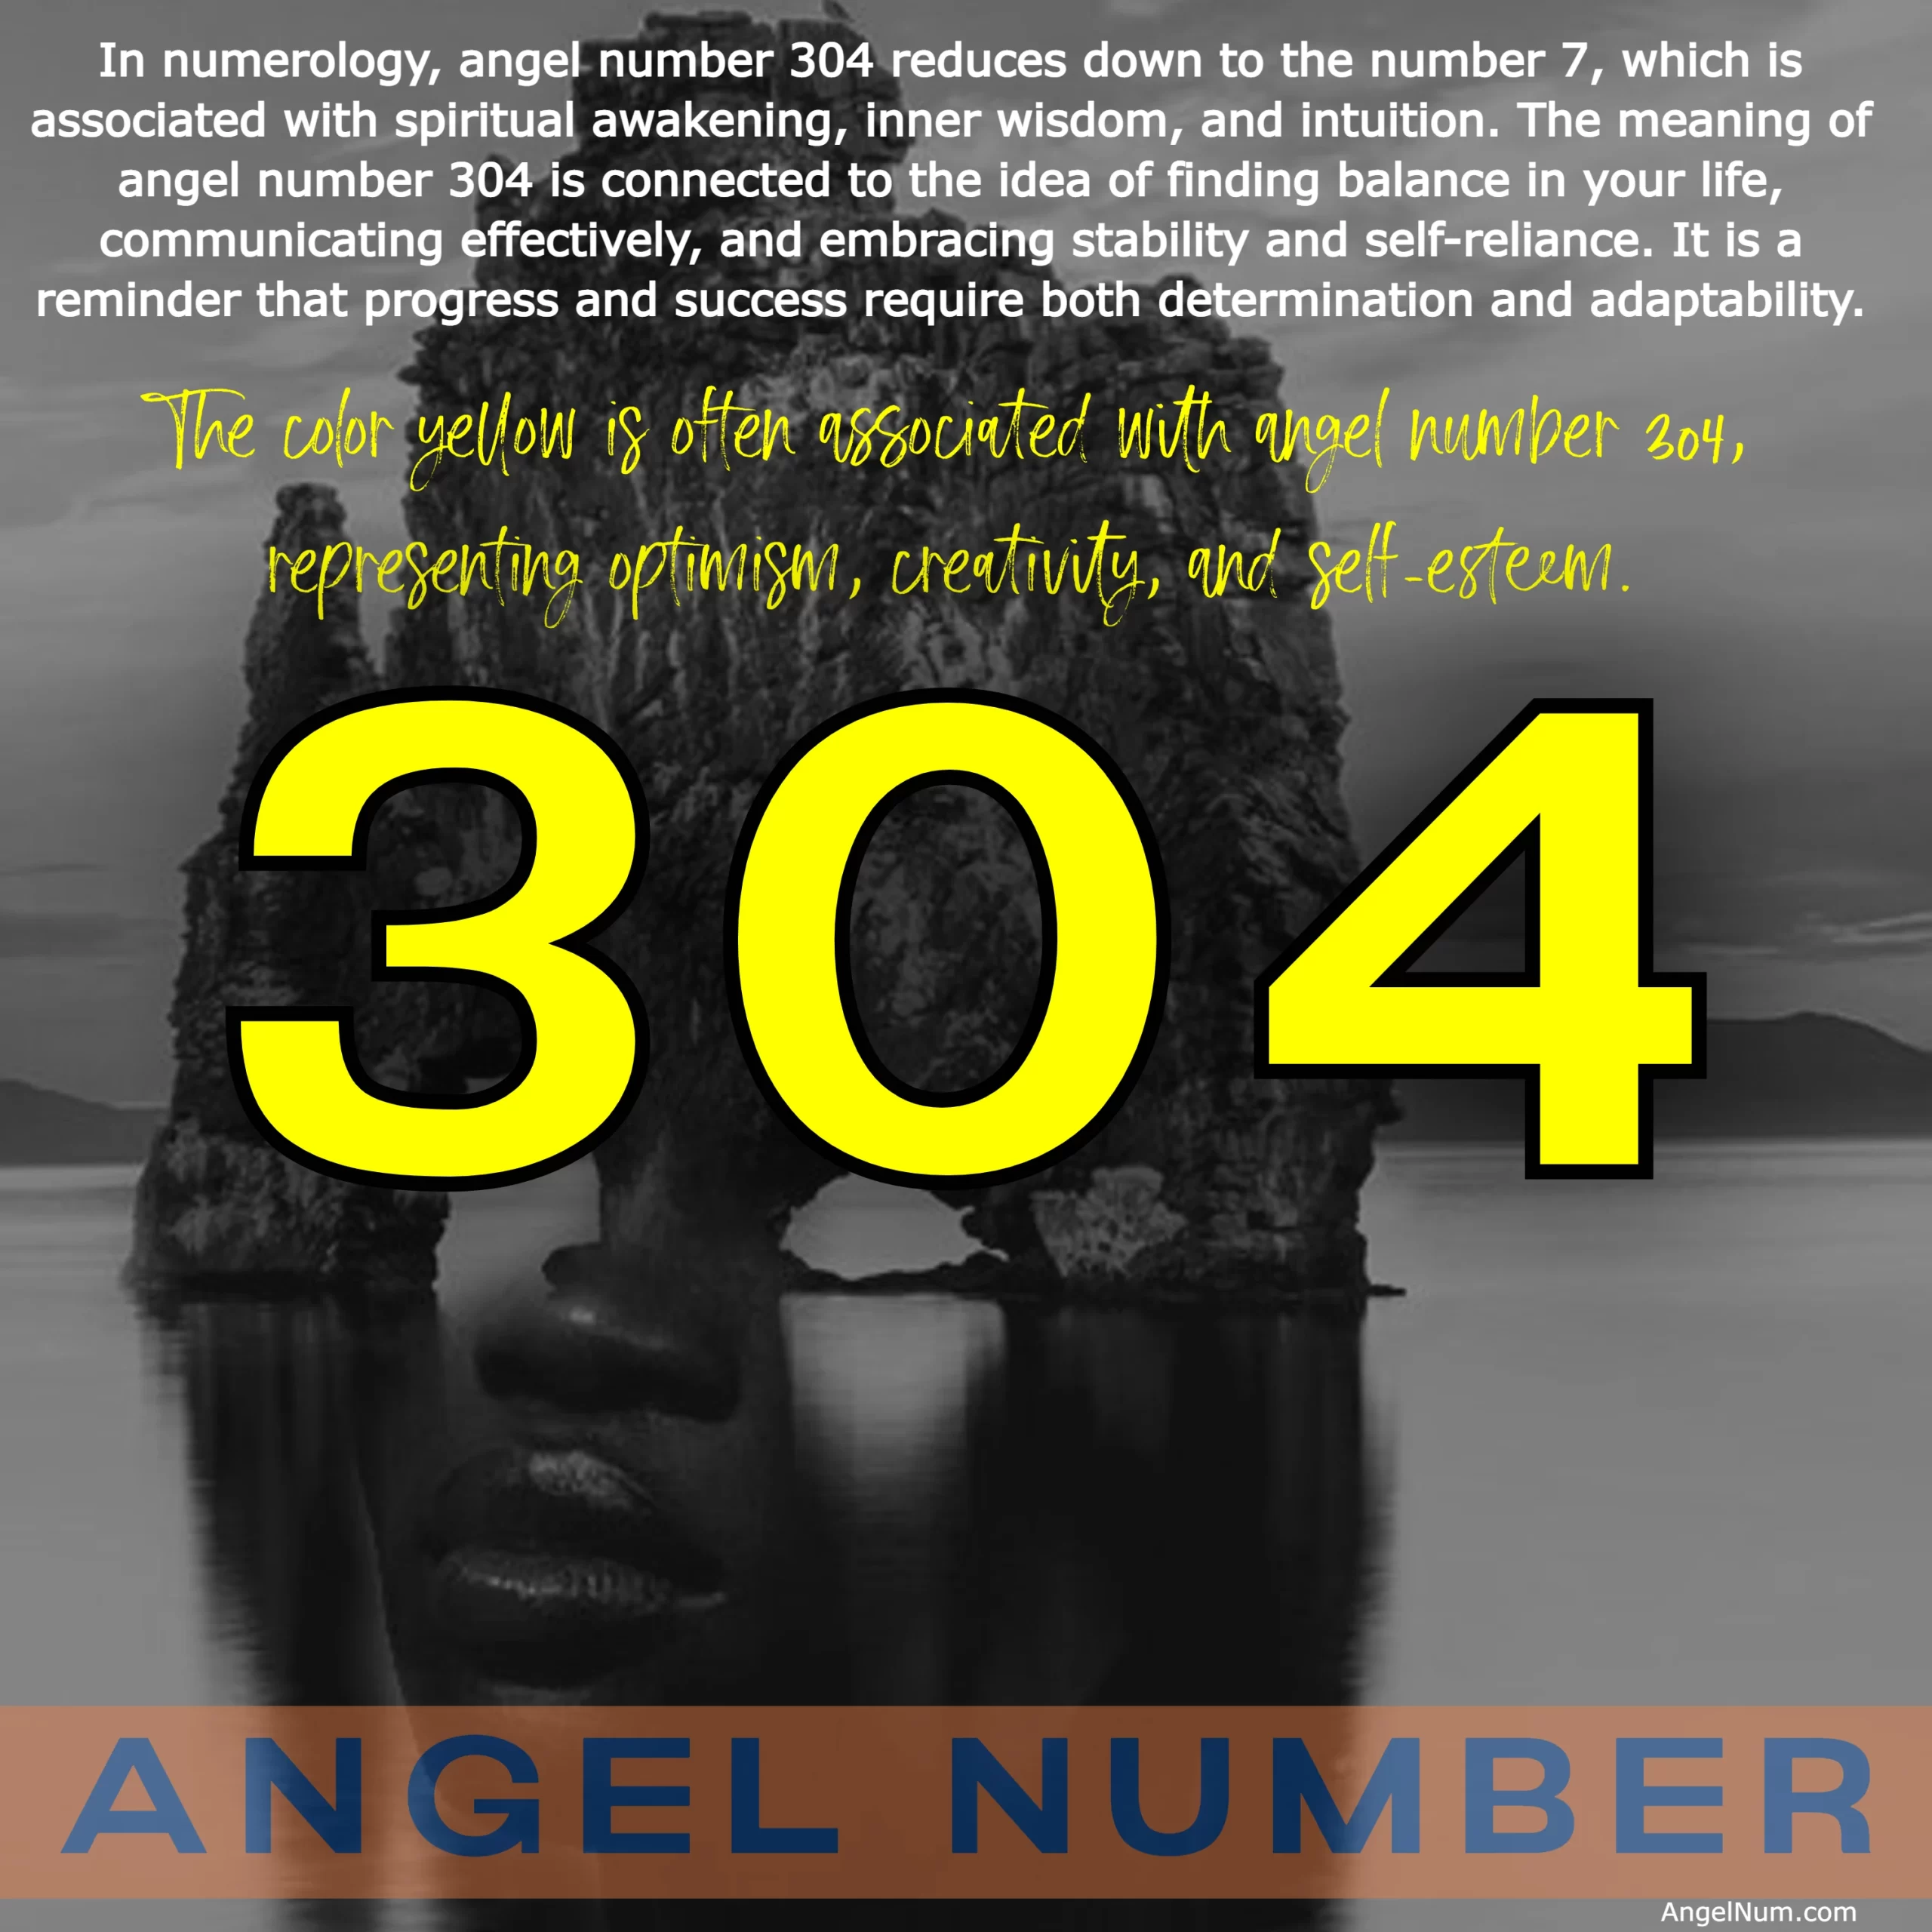 Angel Number 304: Discover the Hidden Meanings and Messages